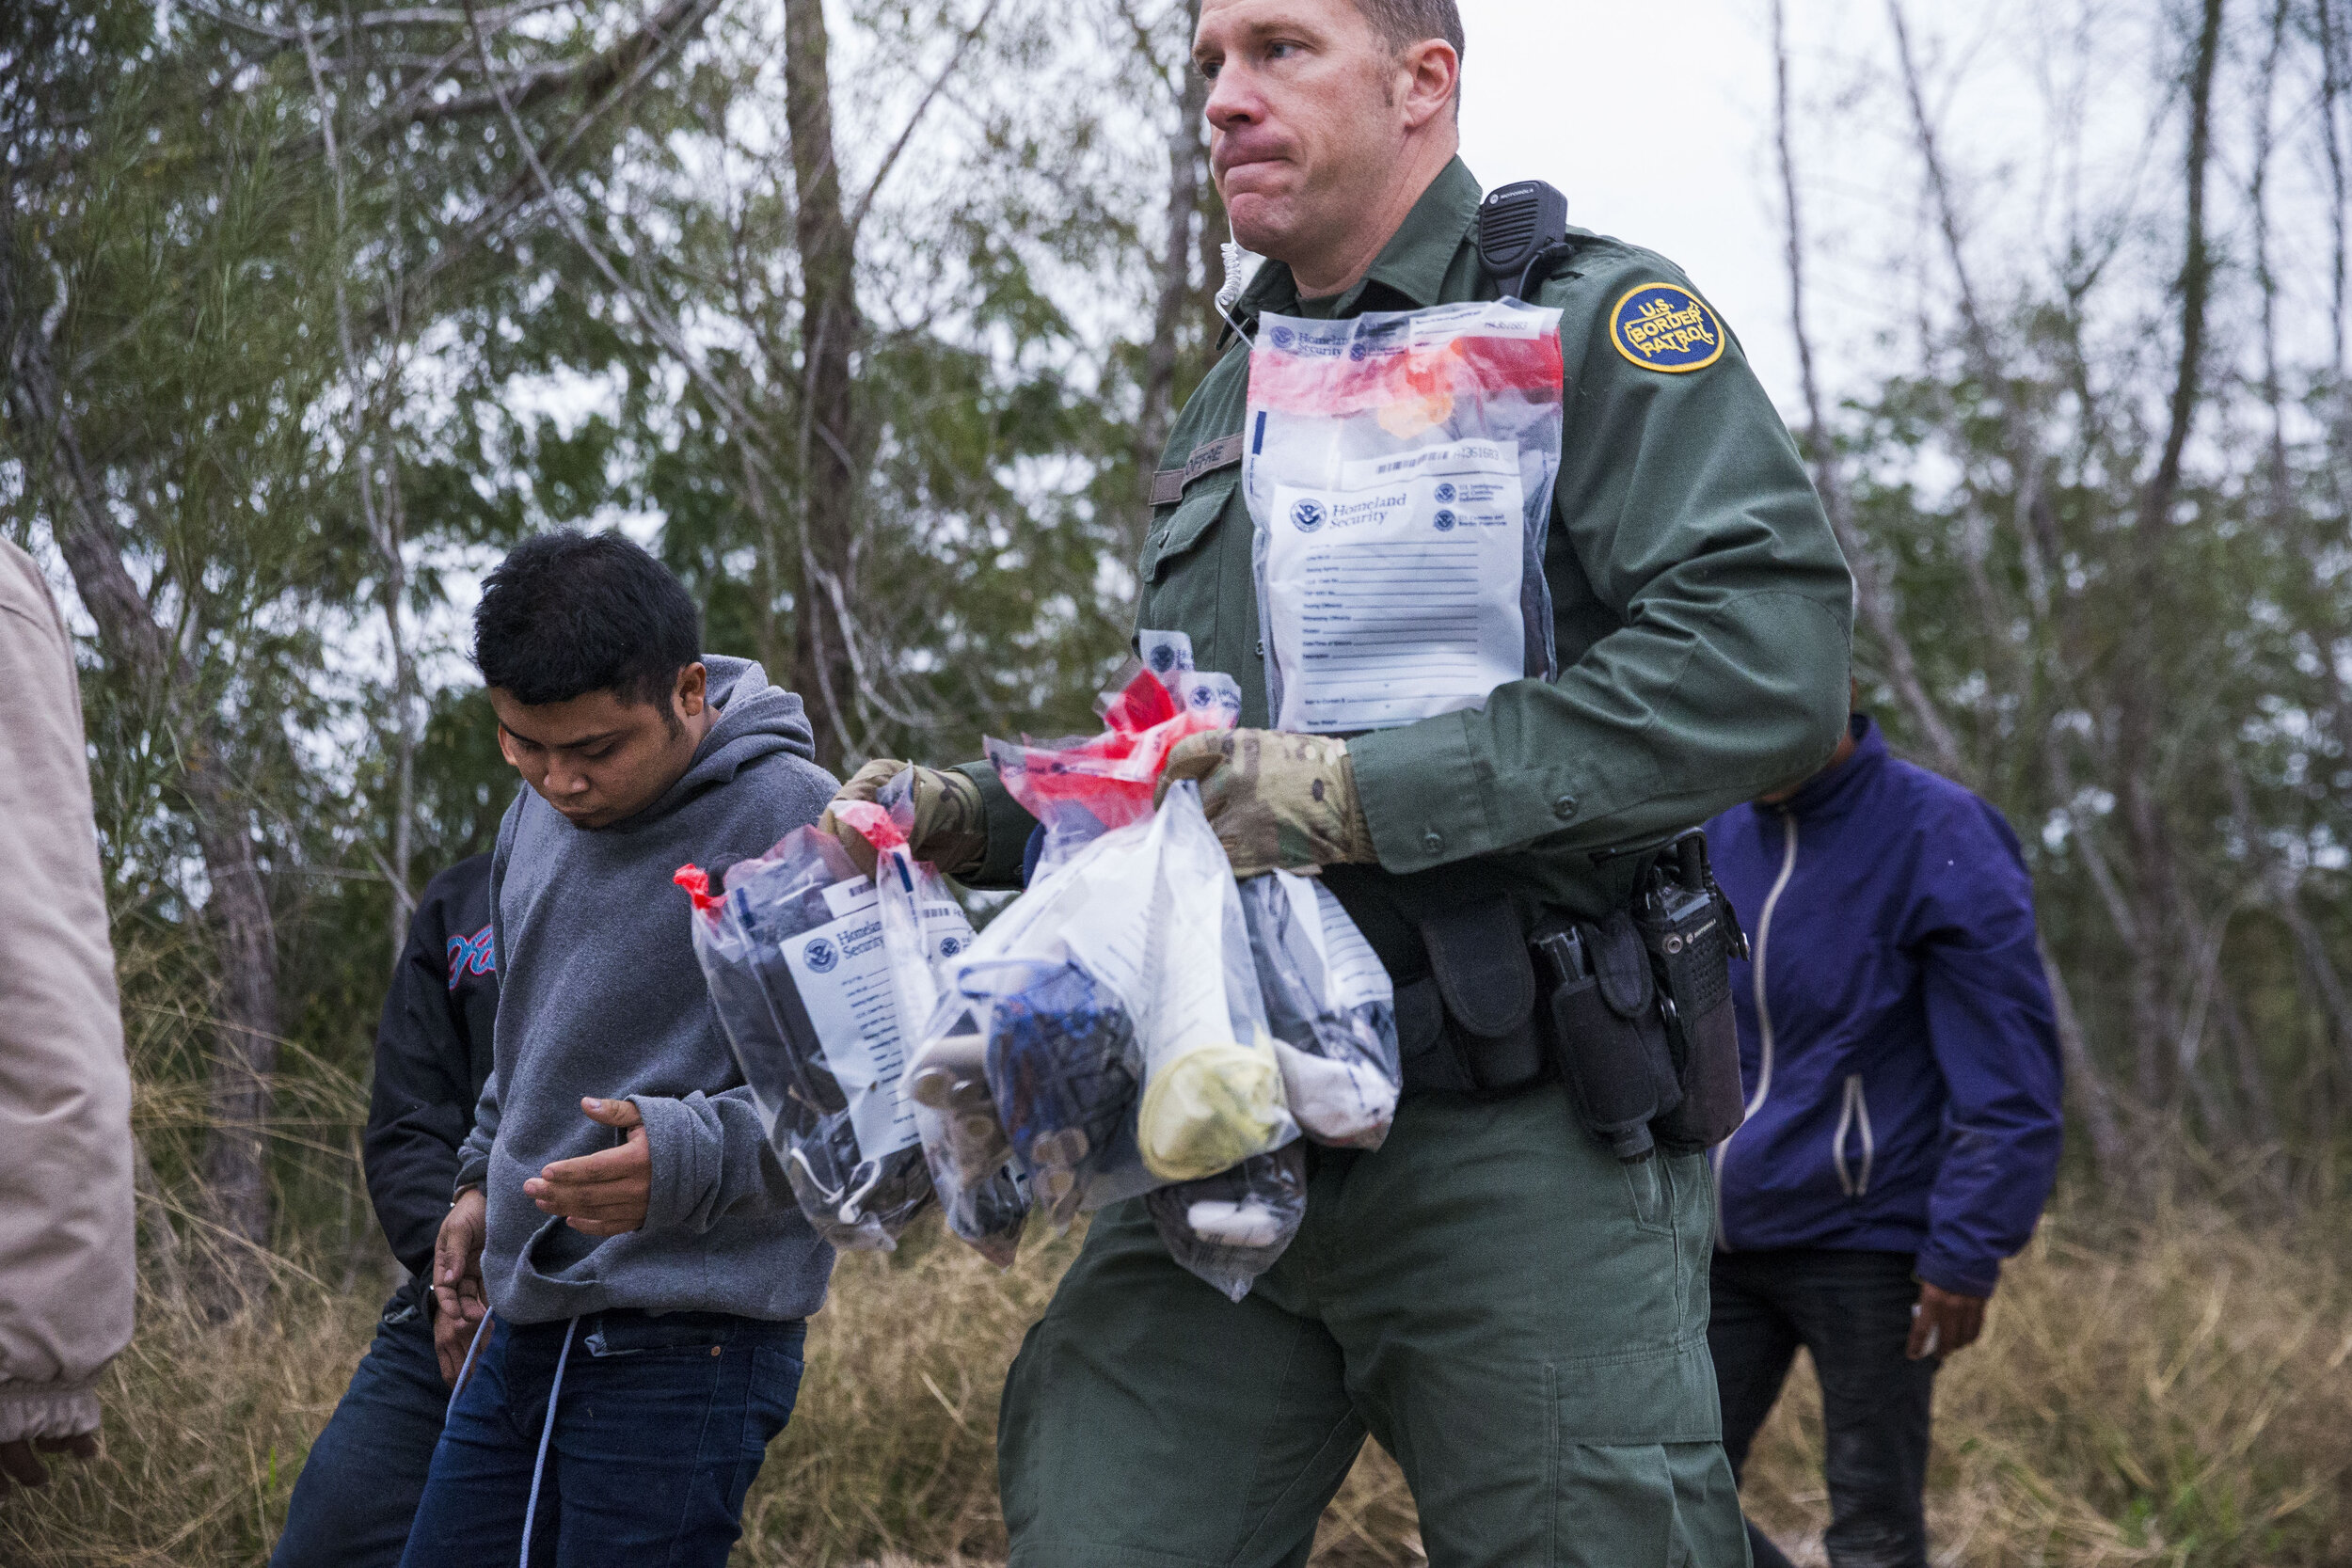  Border Patrol Agent Mark Joffre carries the belongings of a group of immigrants suspected of illegally crossing the border from Mexico into the U.S., while they were being taken into custody on Wednesday, Dec. 5, 2018, near McAllen, TX. 